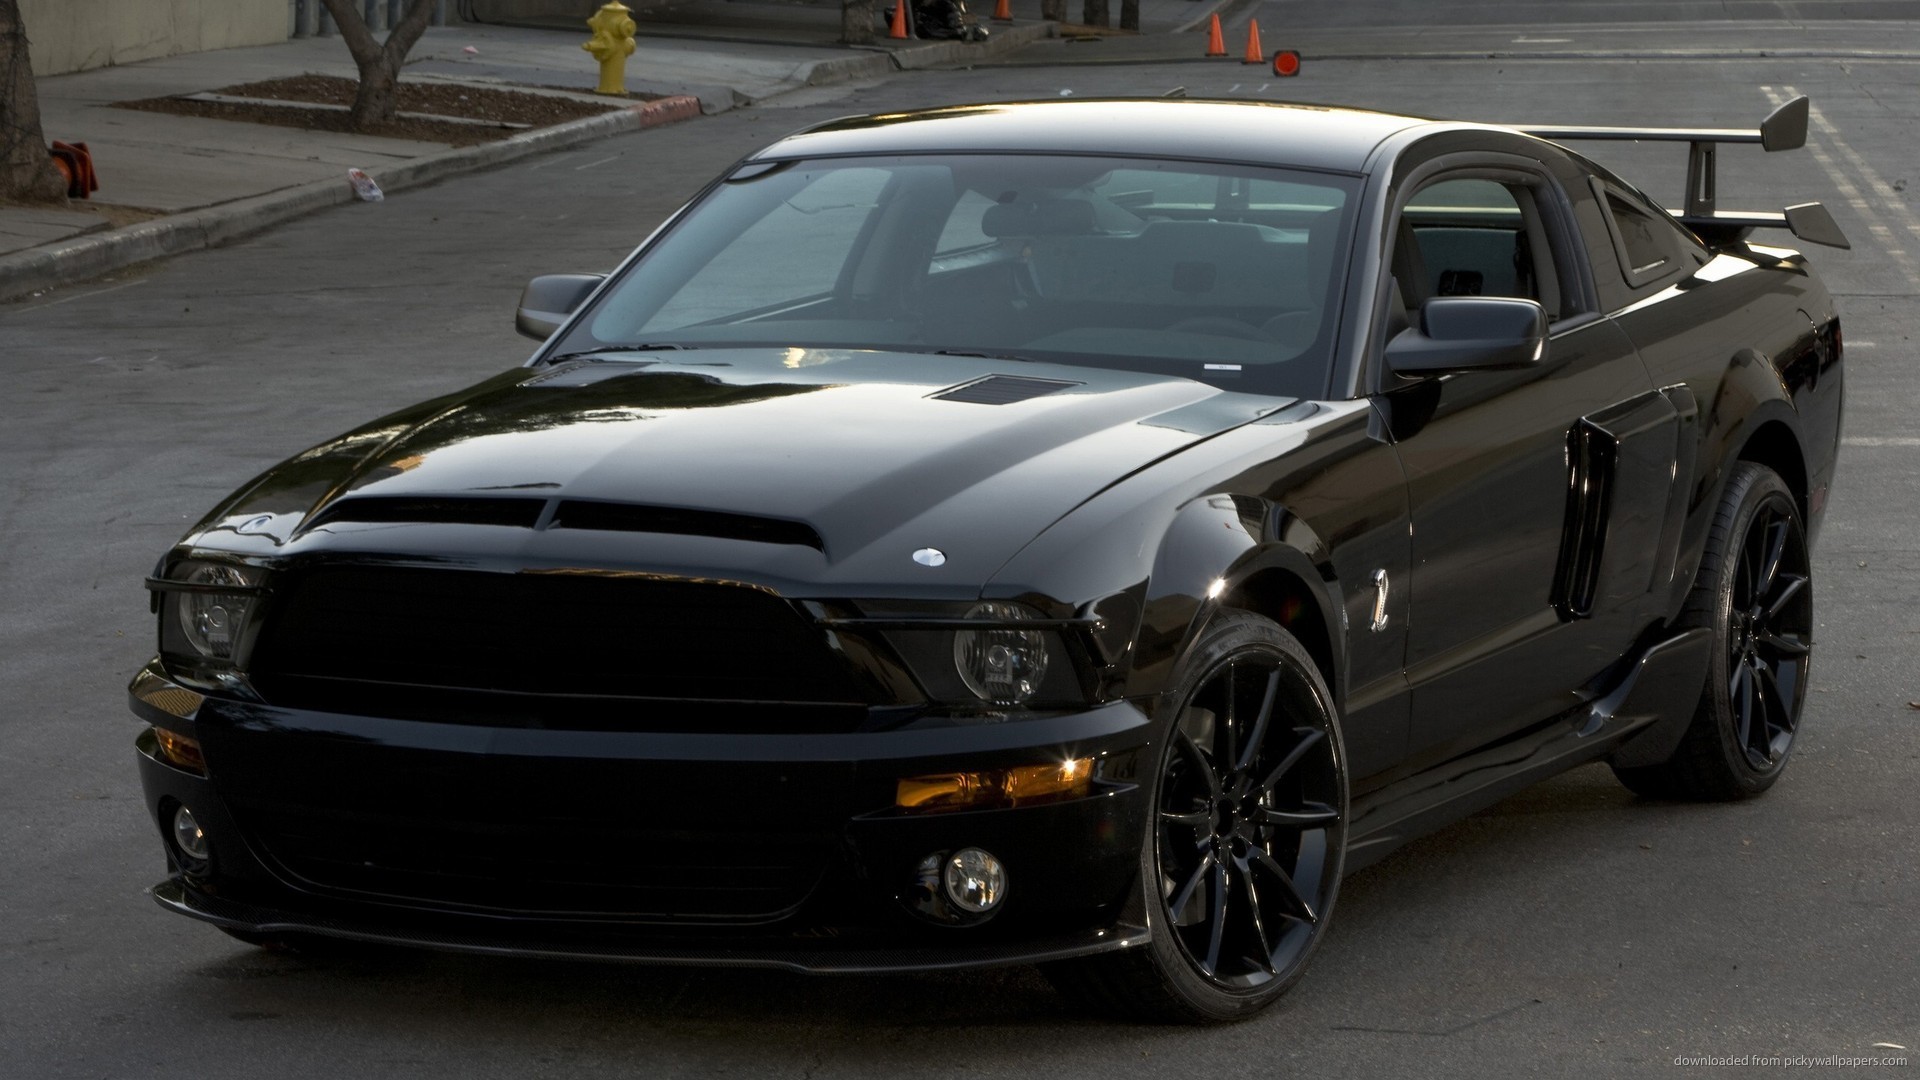 1920x1080 Knight Rider Shelby GT500KR Mustang for 